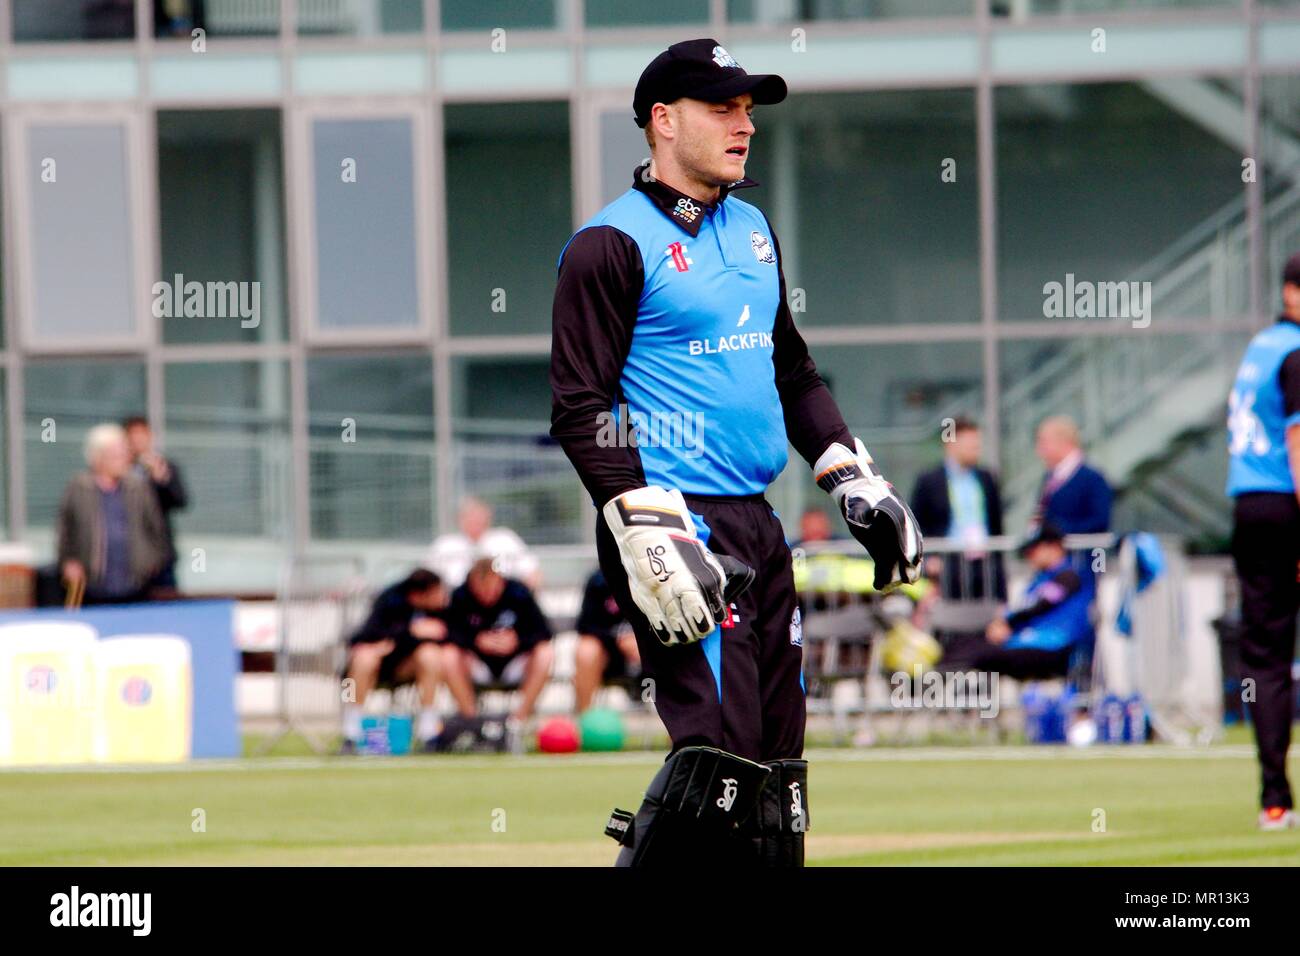 Gosforth, England, 25 May 2018. Ben Cox, wicket keeper for Worcestershire,  playing against Durham in the Royal London One Day match at Roseworth  Terrace. Credit: Colin Edwards/Alamy Live News Stock Photo - Alamy